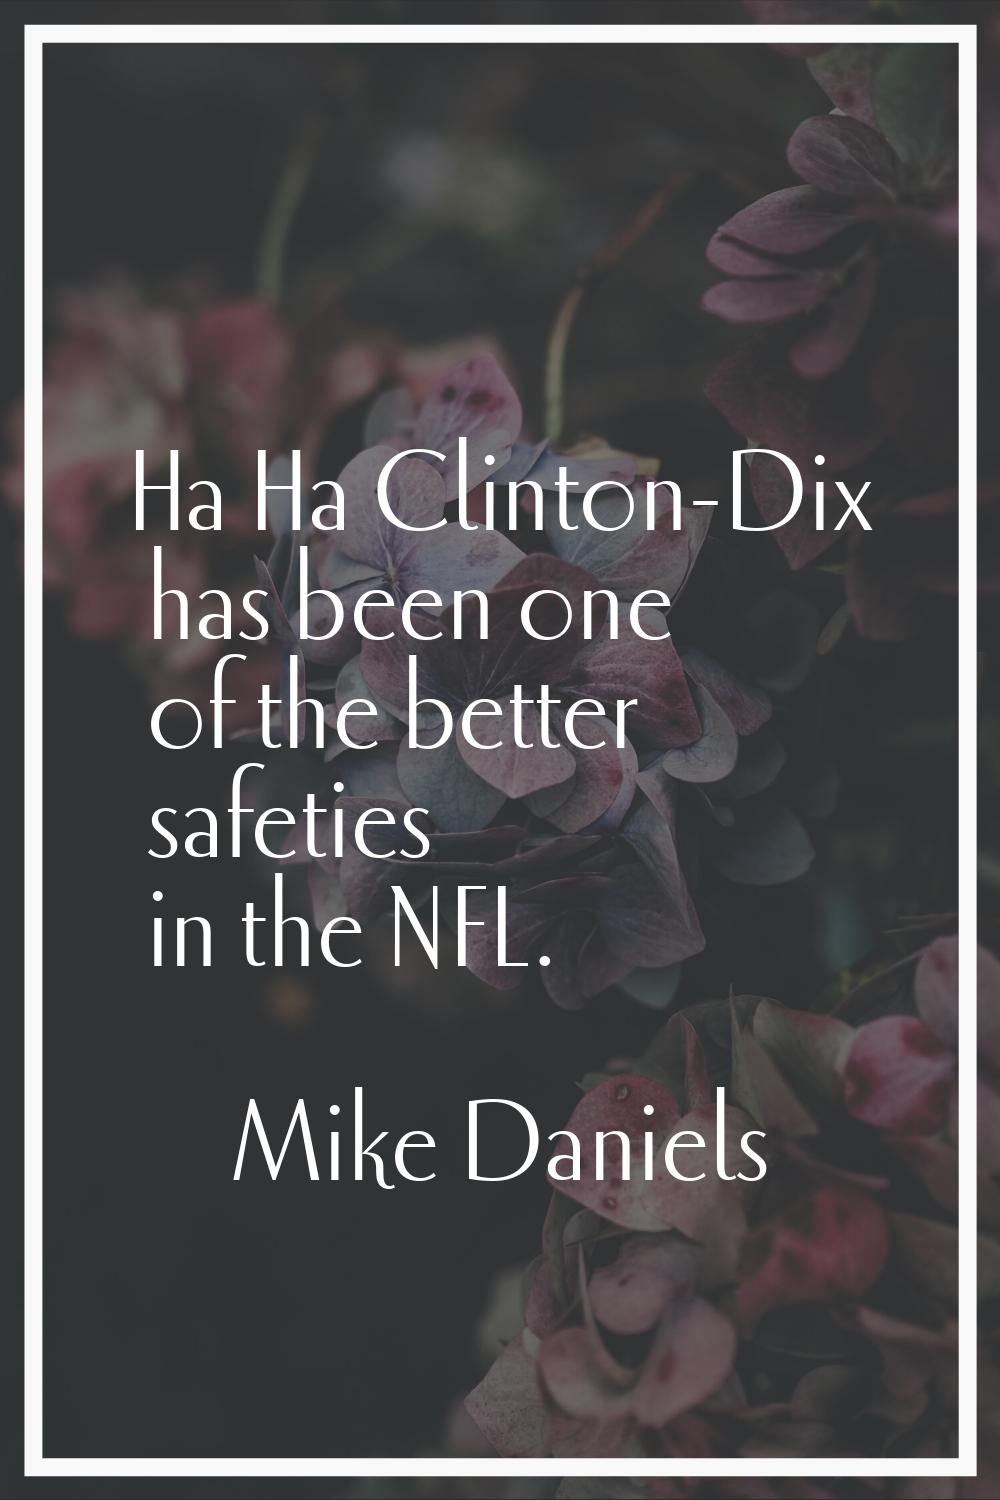 Ha Ha Clinton-Dix has been one of the better safeties in the NFL.